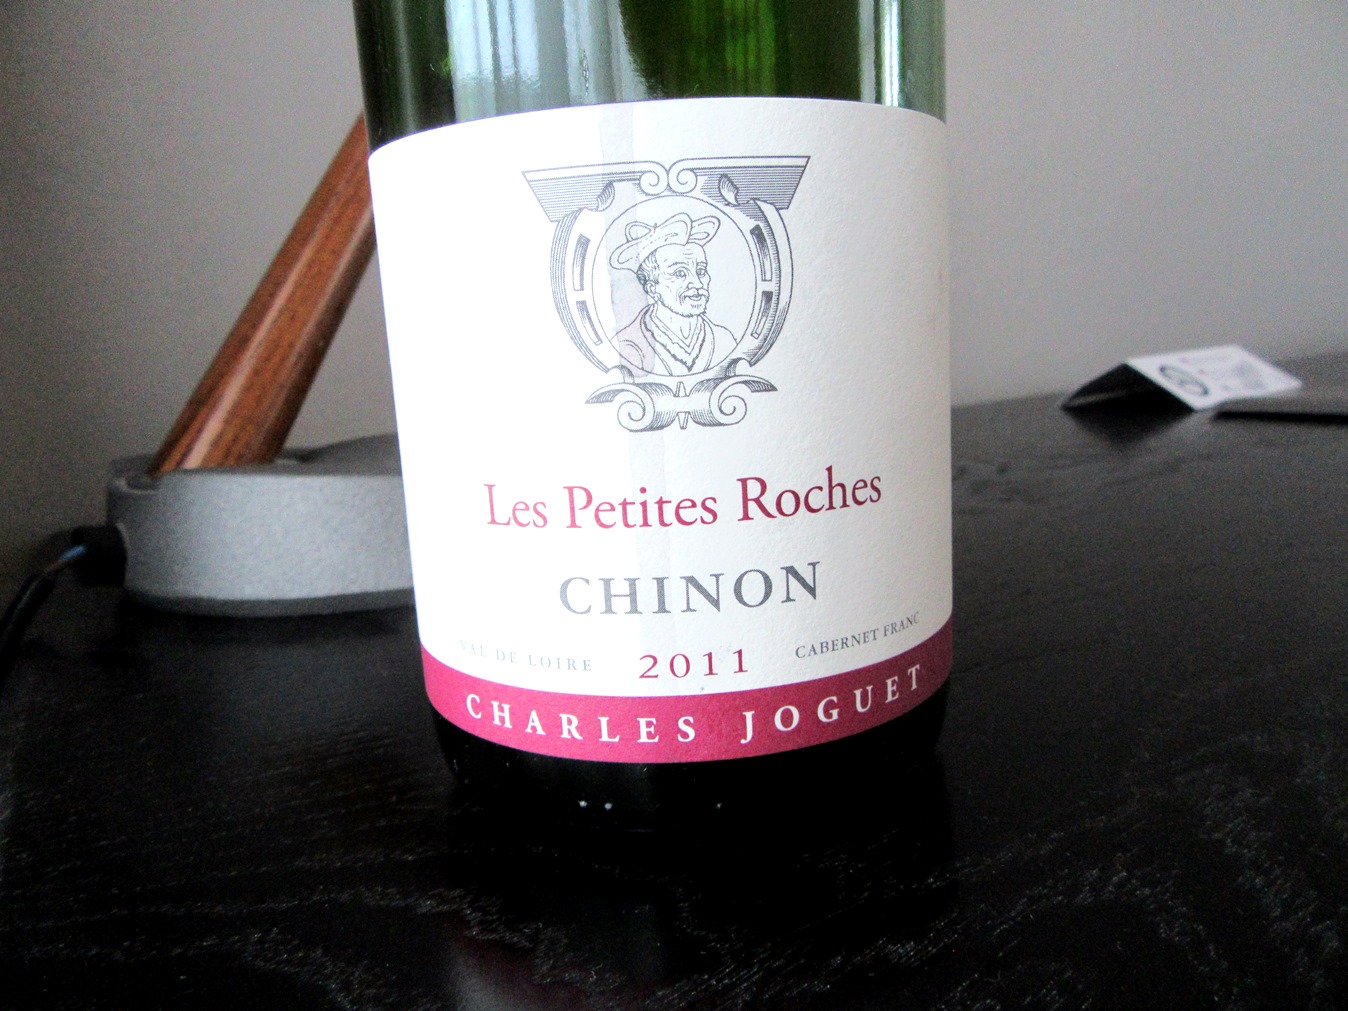 Charles Joguet, Les Petites Roches Chinon 2011, Loire, France, Wine Casual